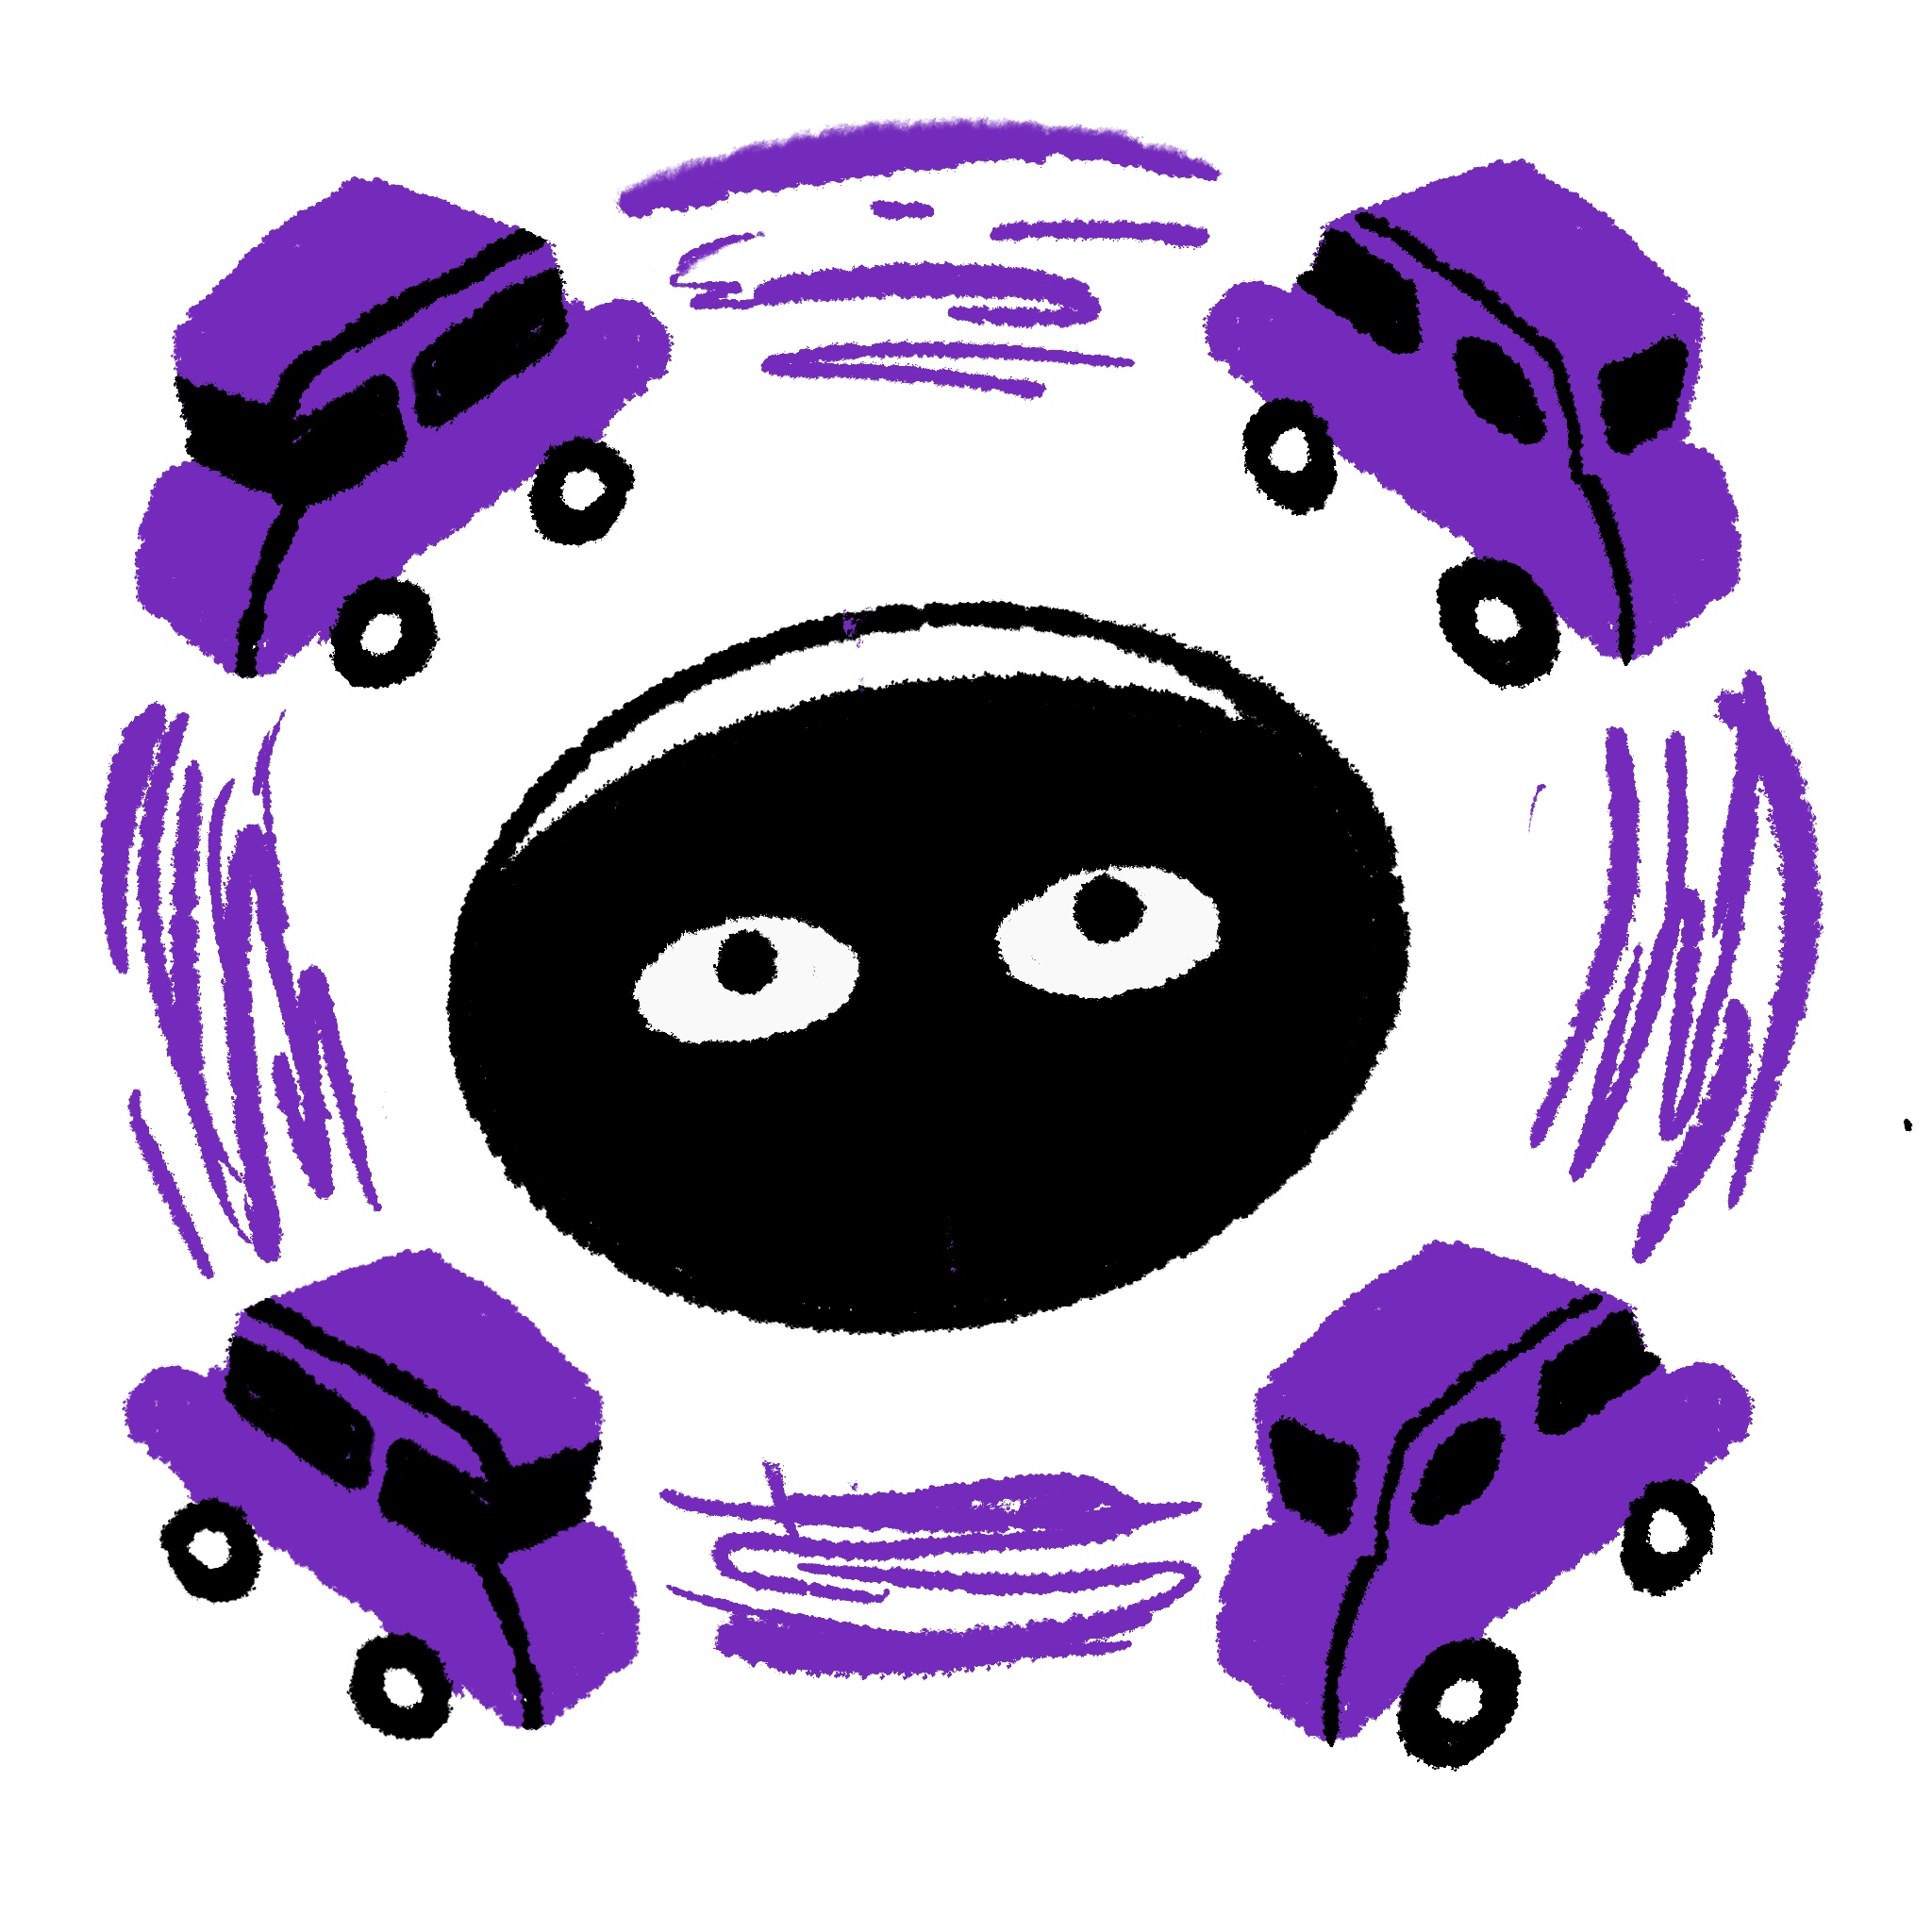 Spot illustration of 4 cars circling a hole with eyes peering out of it